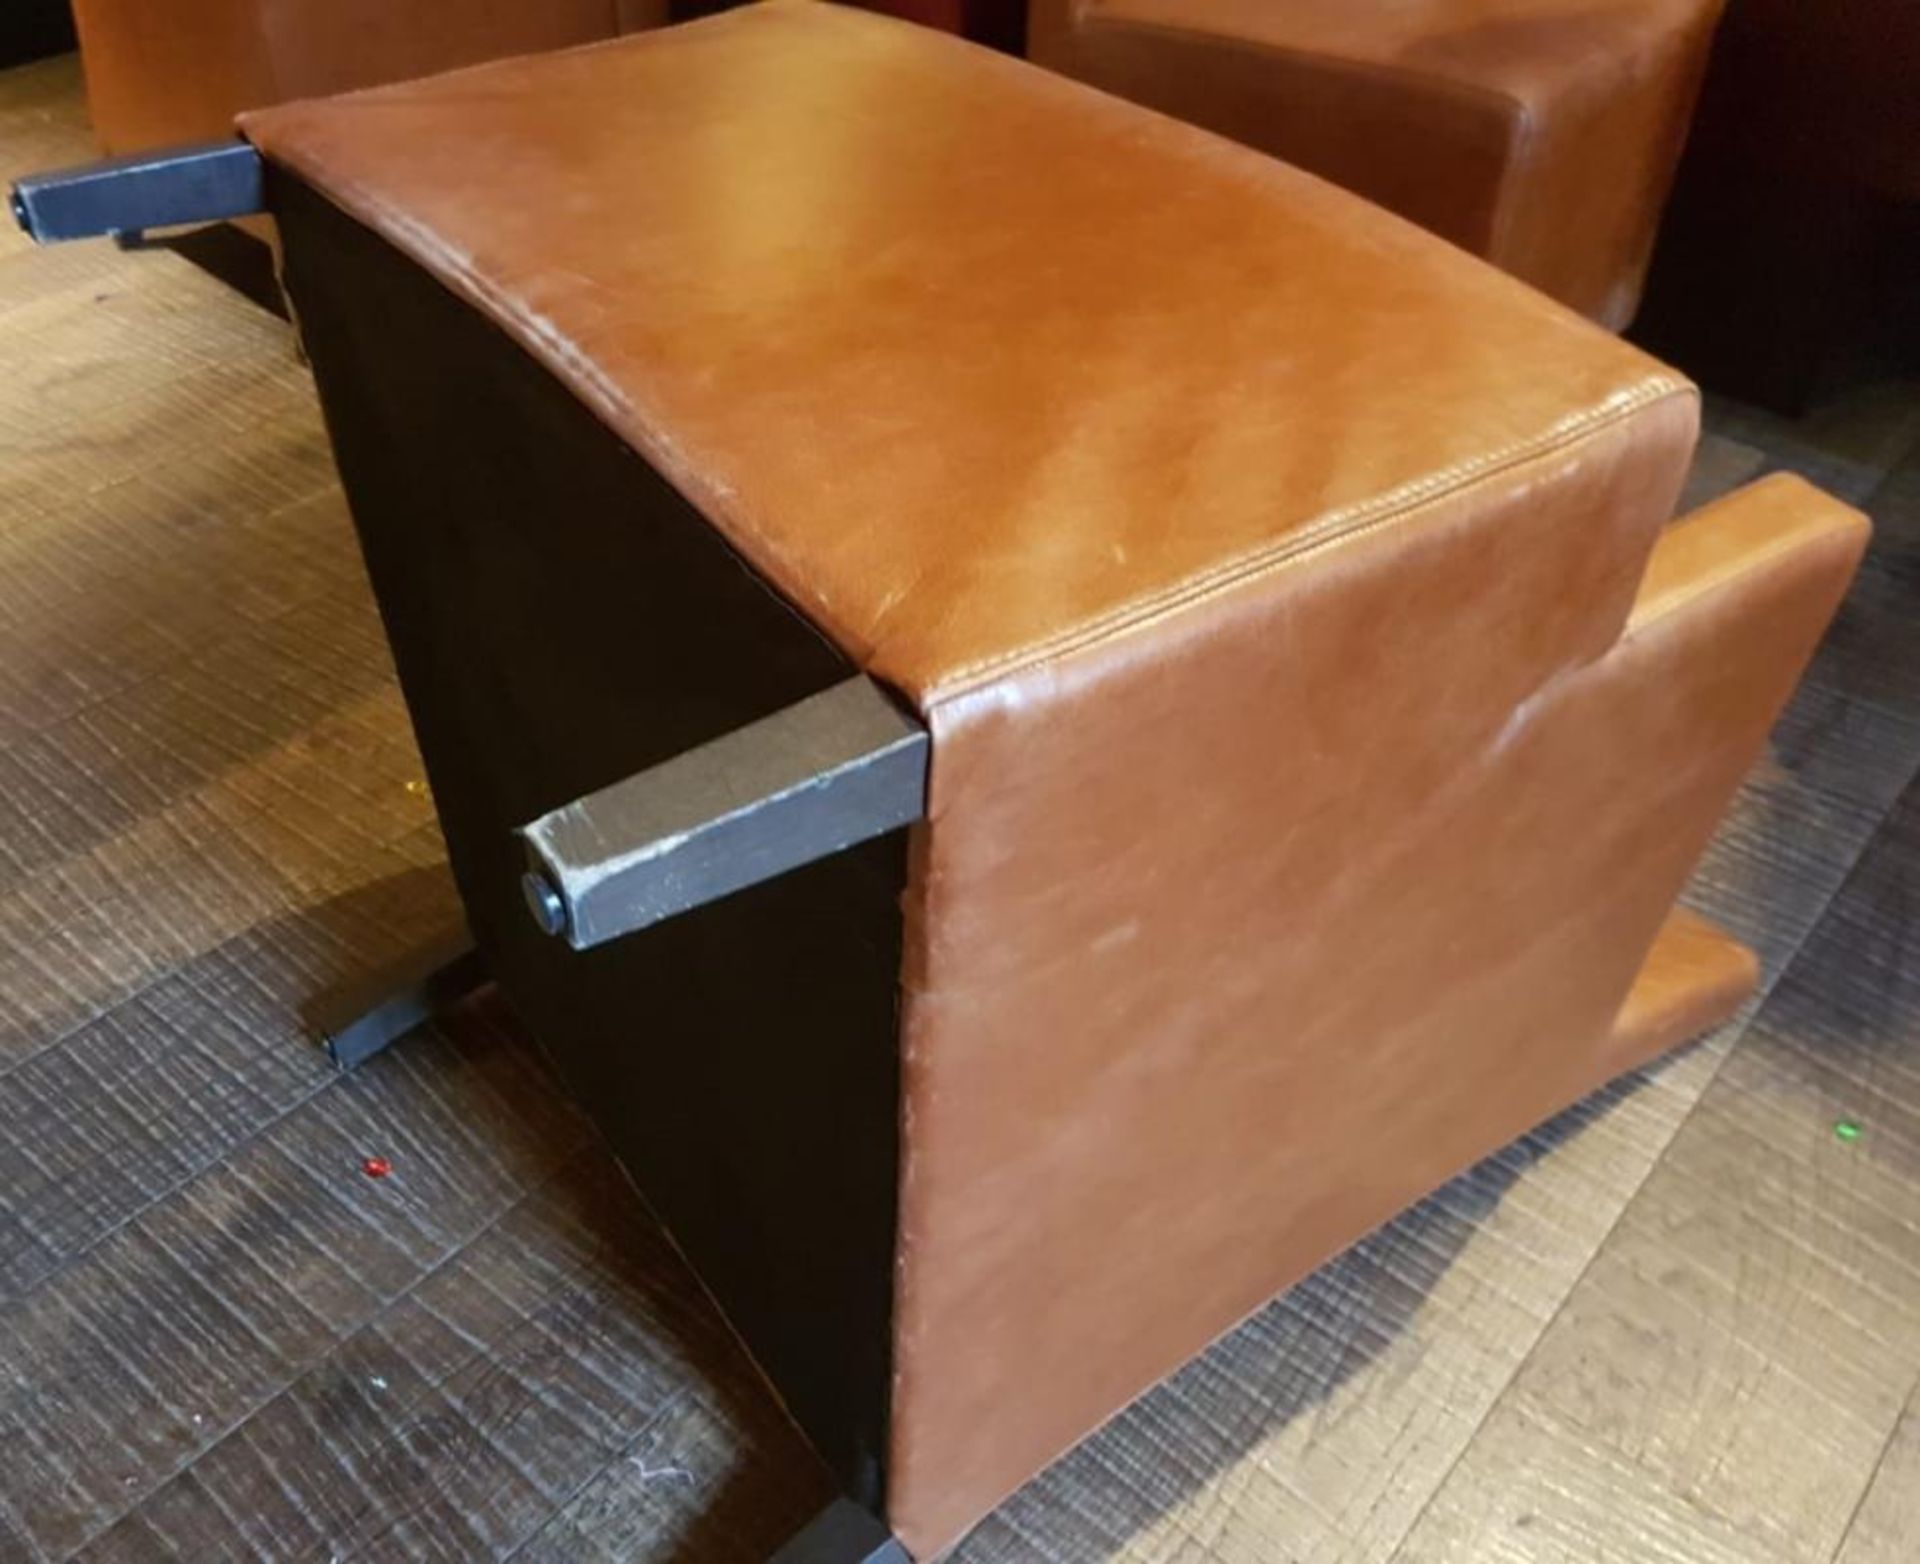 1 x Large Armchair Upholstered In Tan Leather - Recently Removed From A City Centre Steakhouse Resta - Image 2 of 5